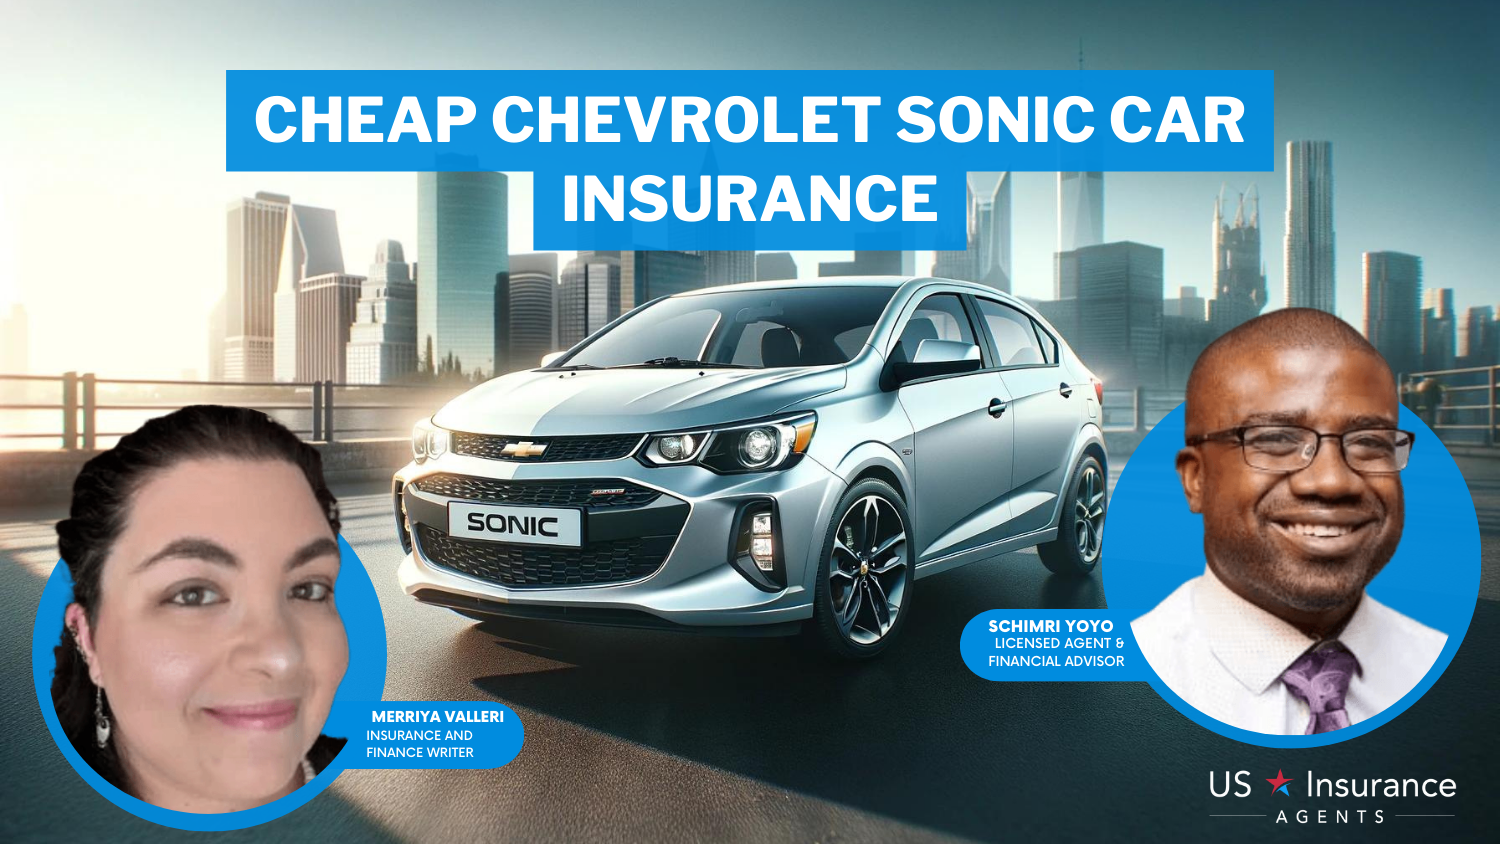 Cheap Chevrolet Sonic Car Insurance: USAA, Erie, and Safeco